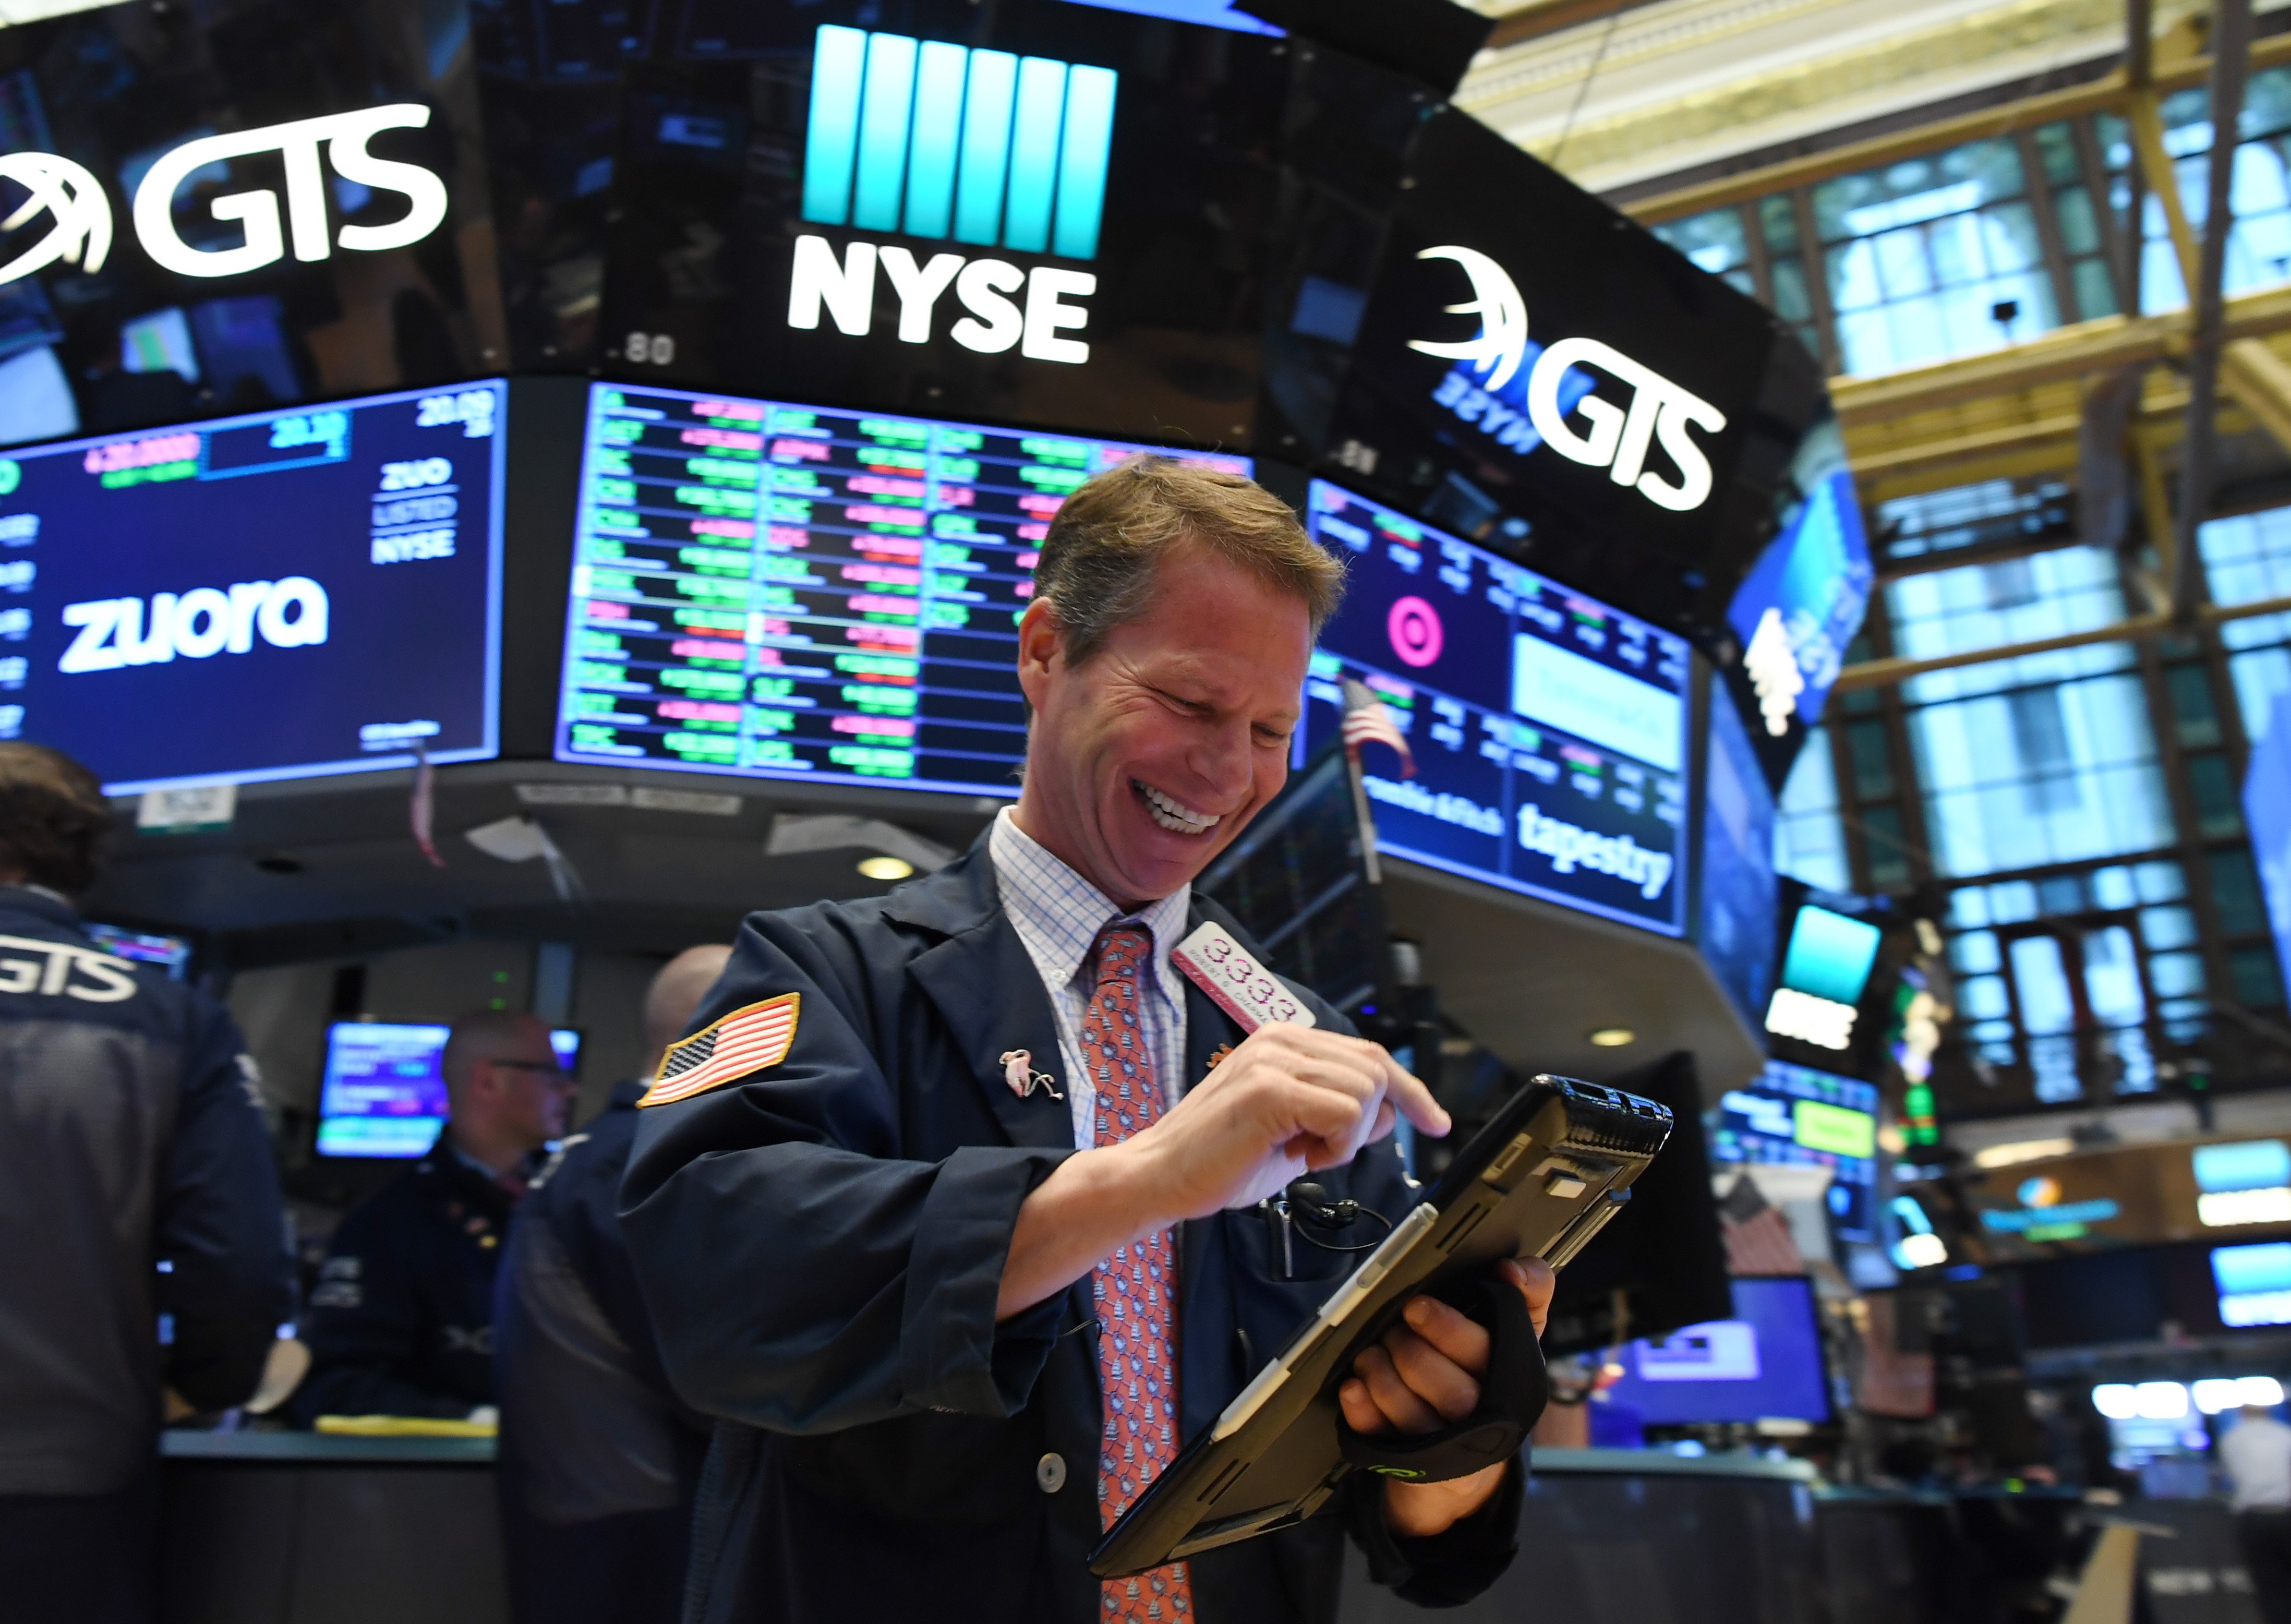 A trader at the New York Stock Exchange smiles as US stocks close higher on April 12. Stocks have enjoyed a bull run under the Trump administration and corporate stock buy-backs have been the major source of demand for American equities. Photo: Xinhua